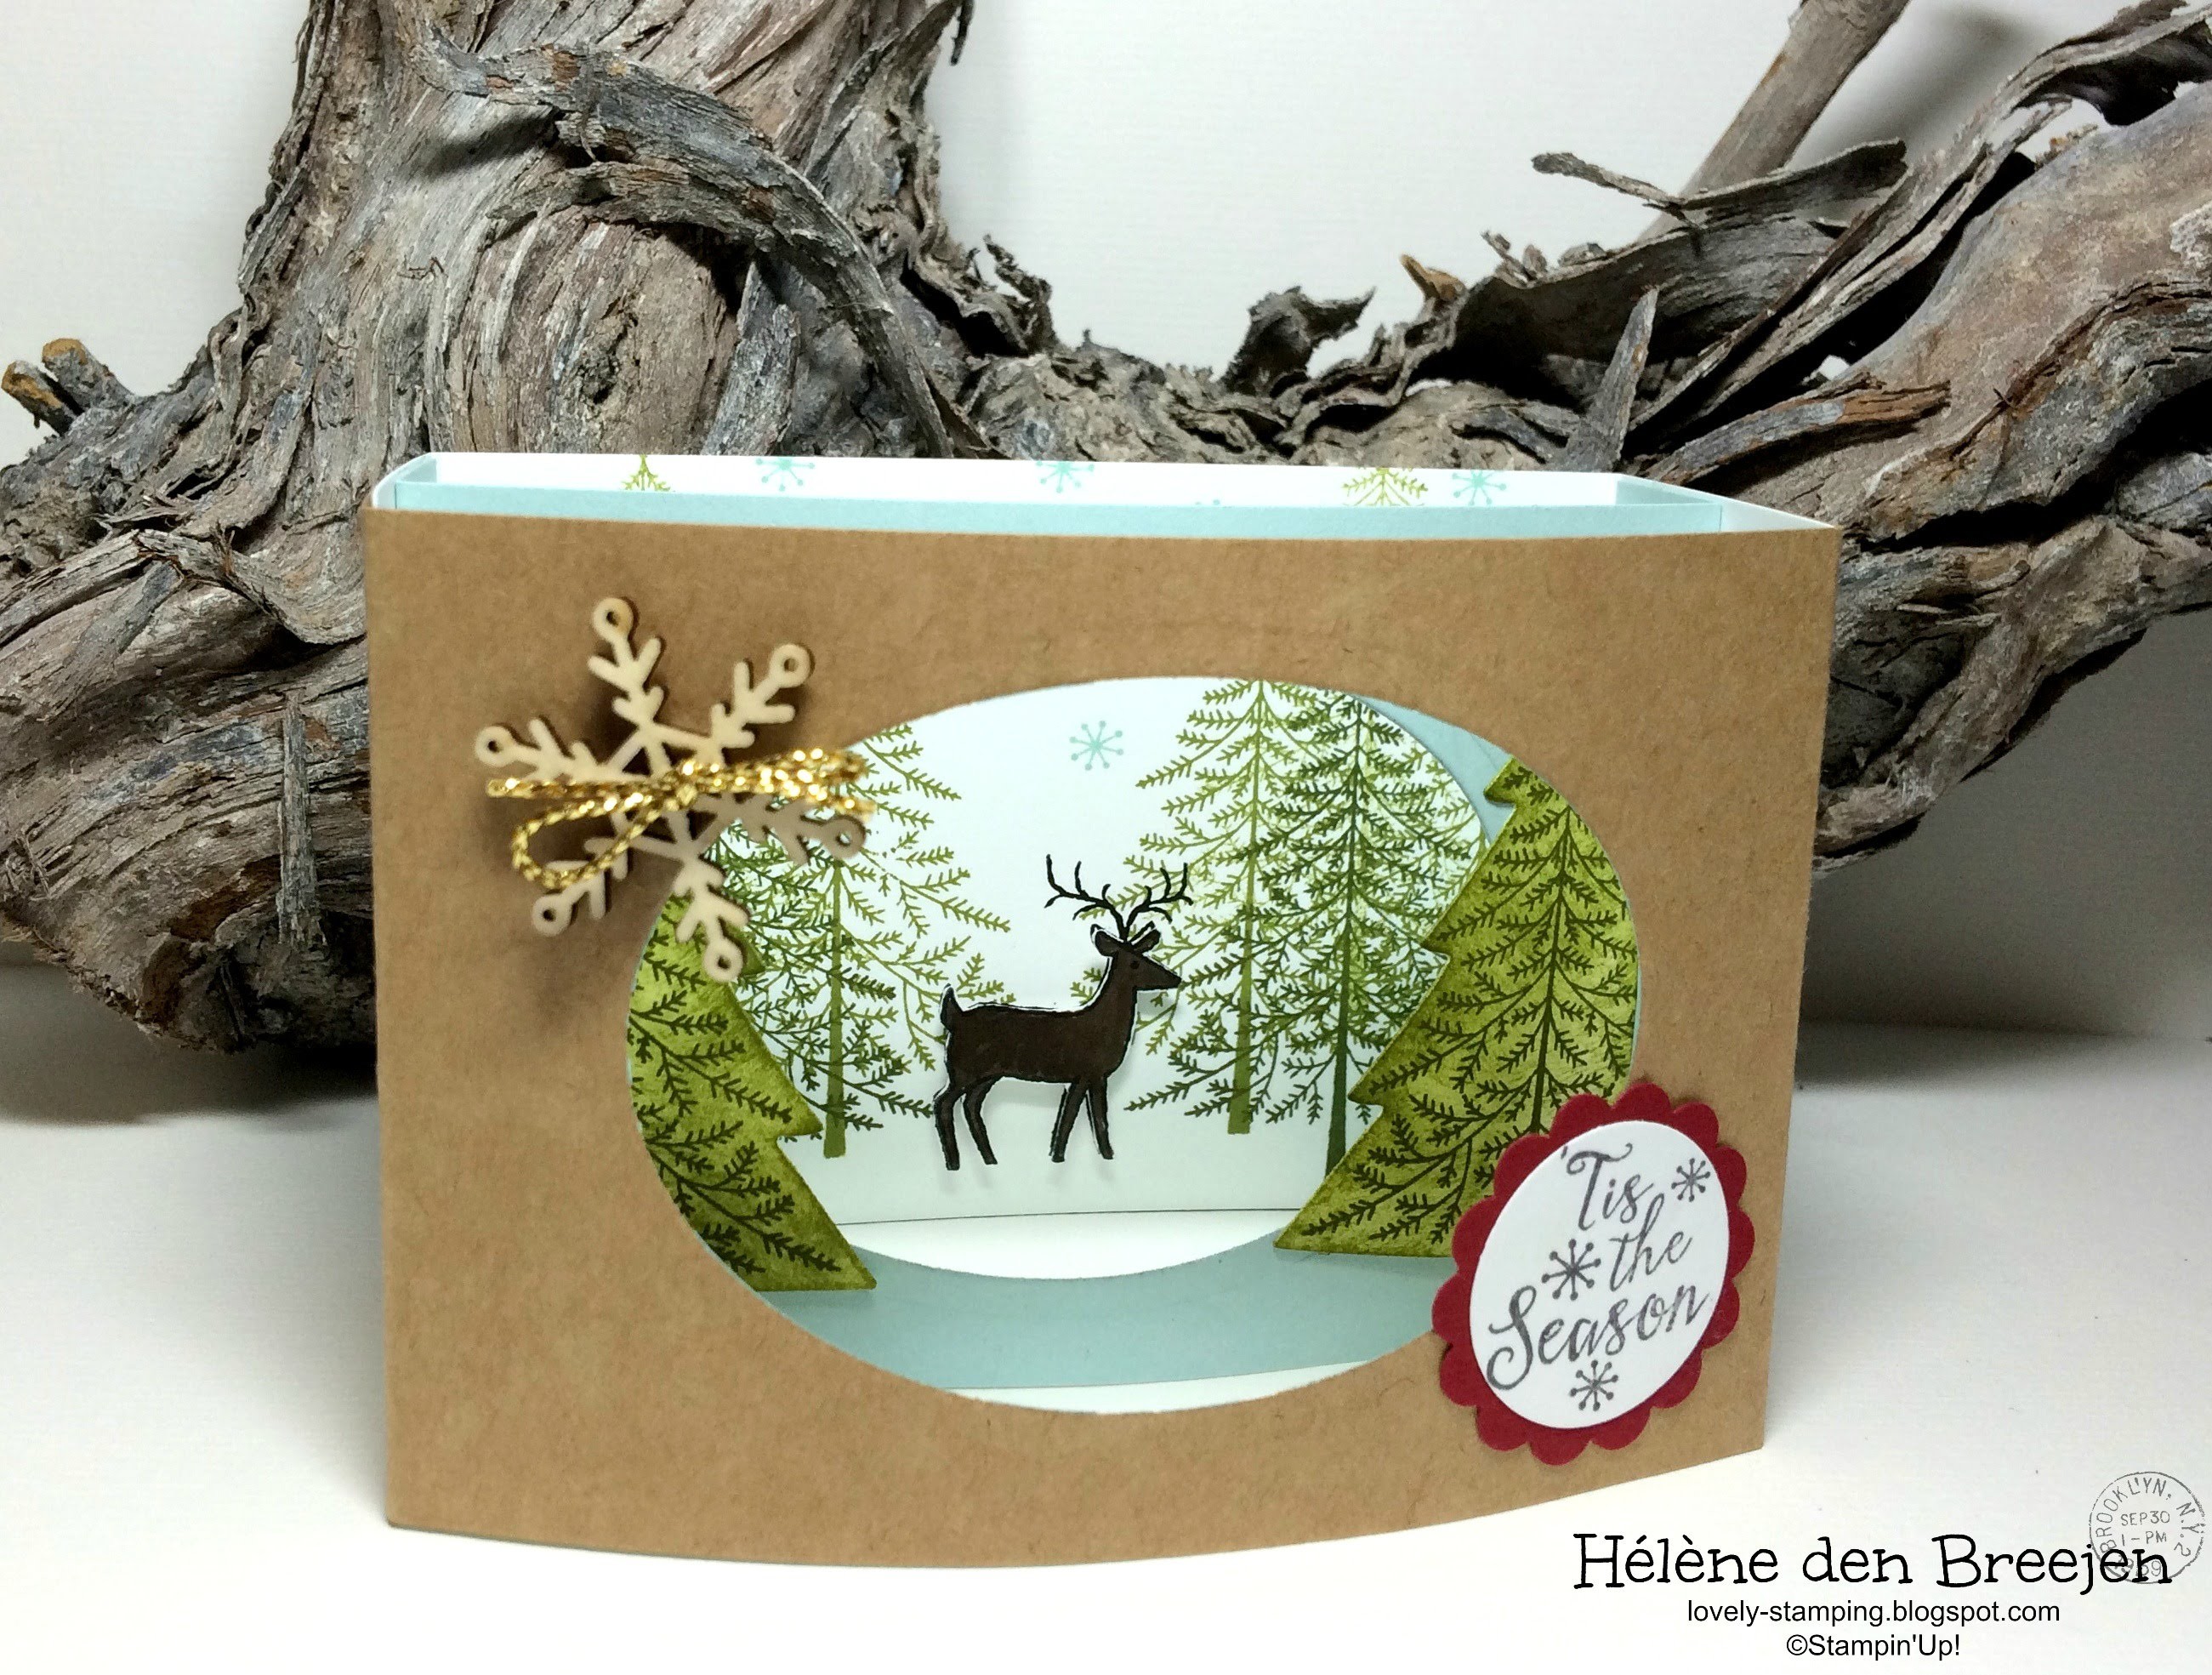 Stampin'Up! Peaceful pines deel 2 + Heart of Stampin'Up! NL